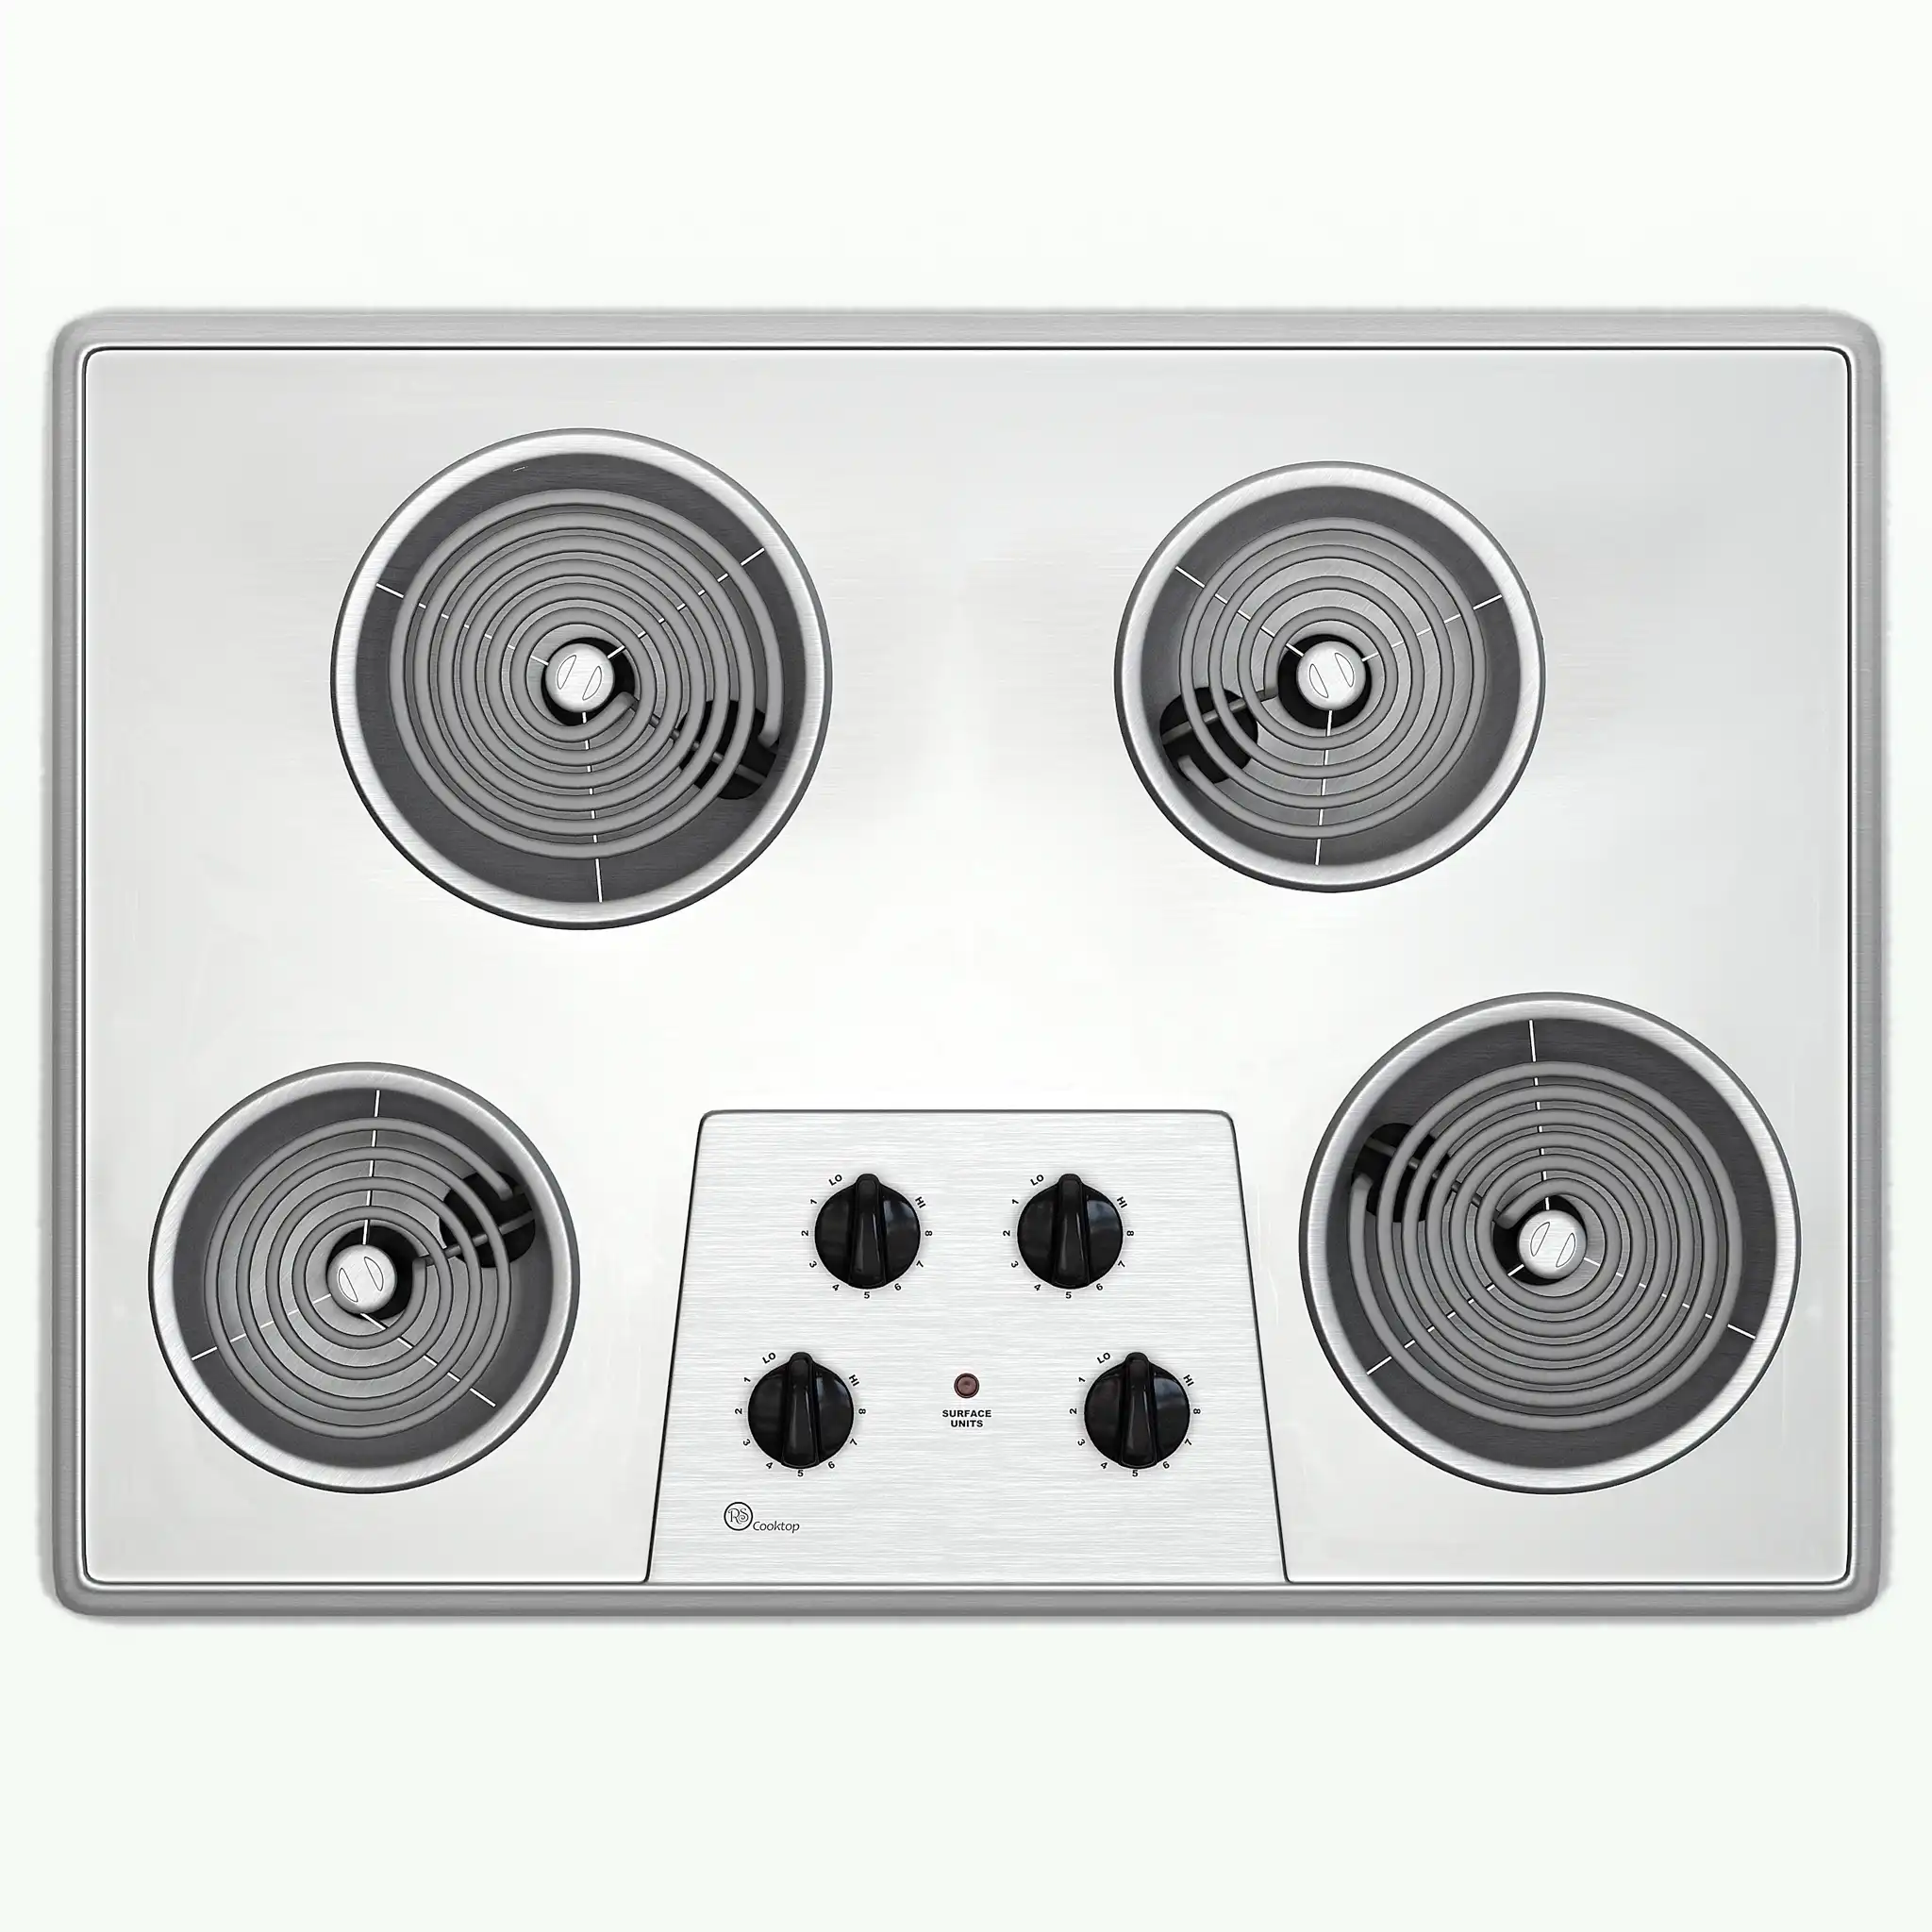 Cooktop Electric Opened 3D Model